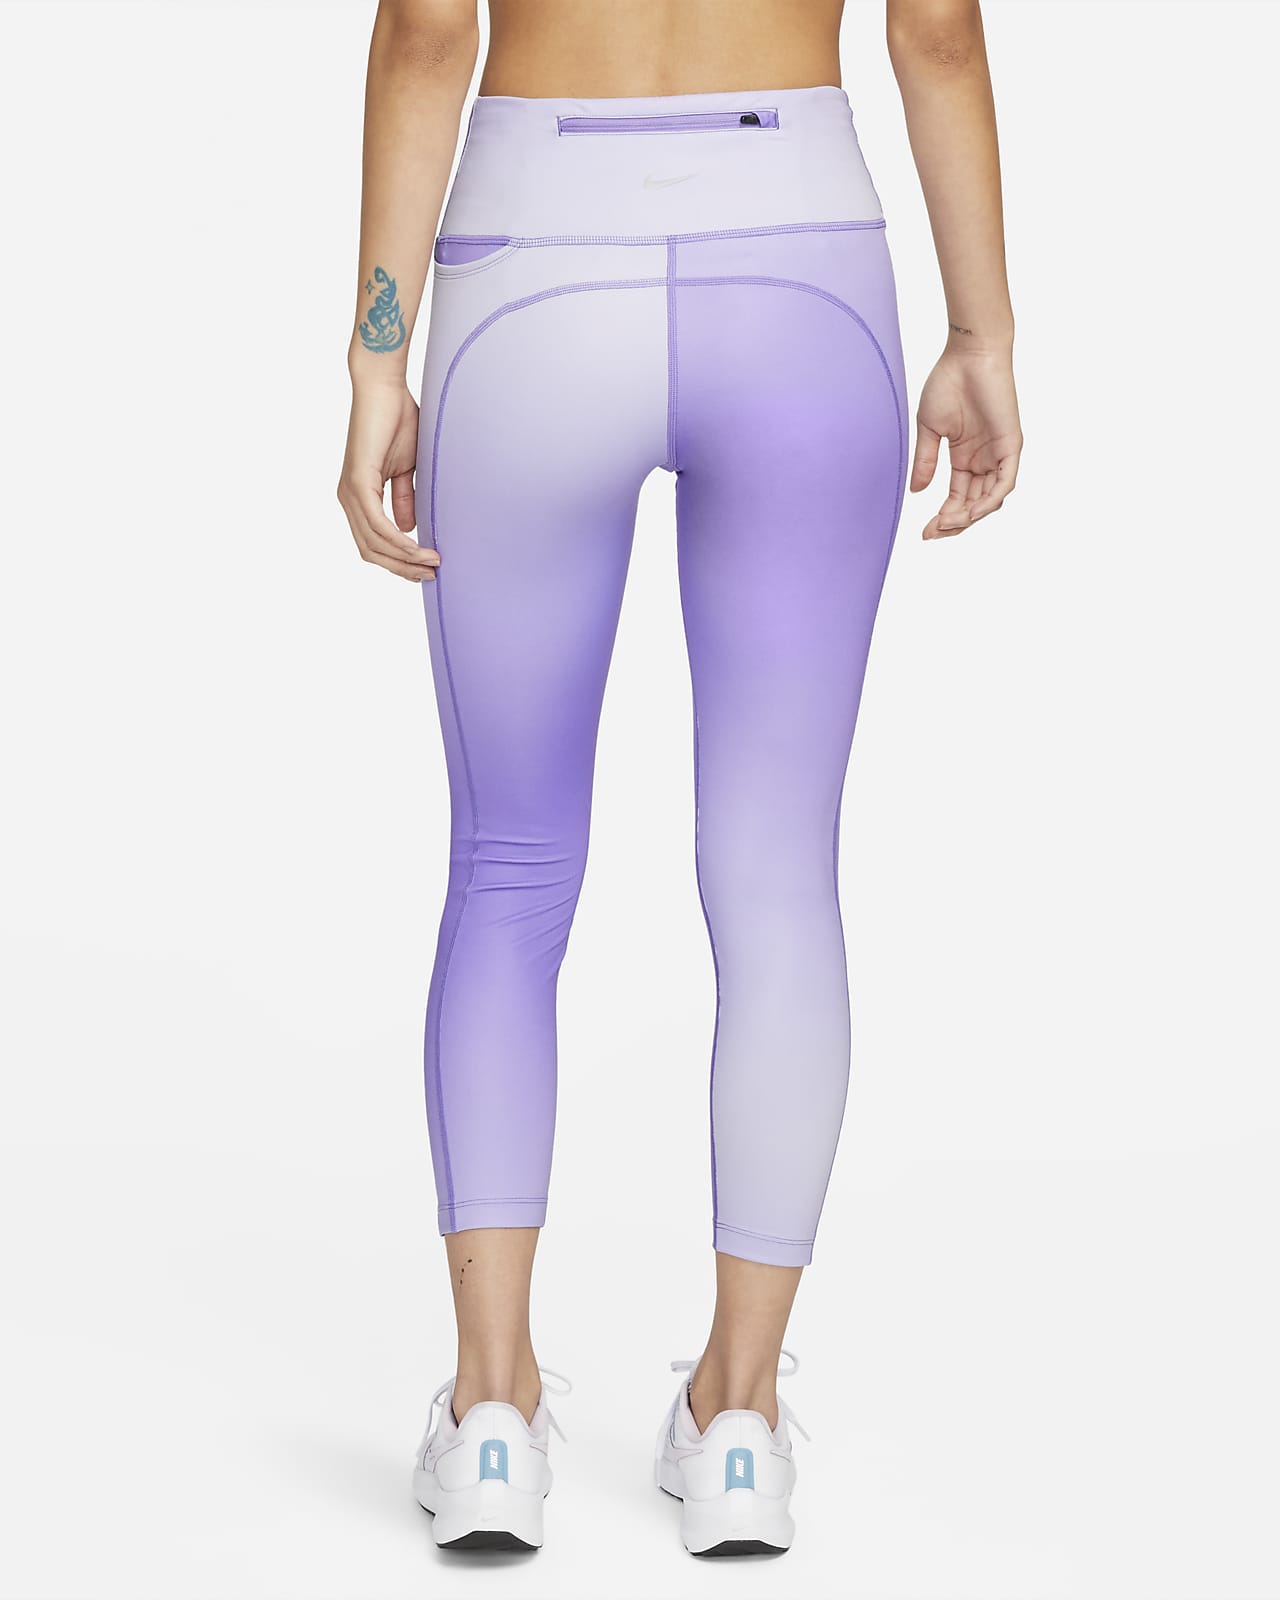 Update more than 86 nike yoga pants with pockets latest - in.eteachers